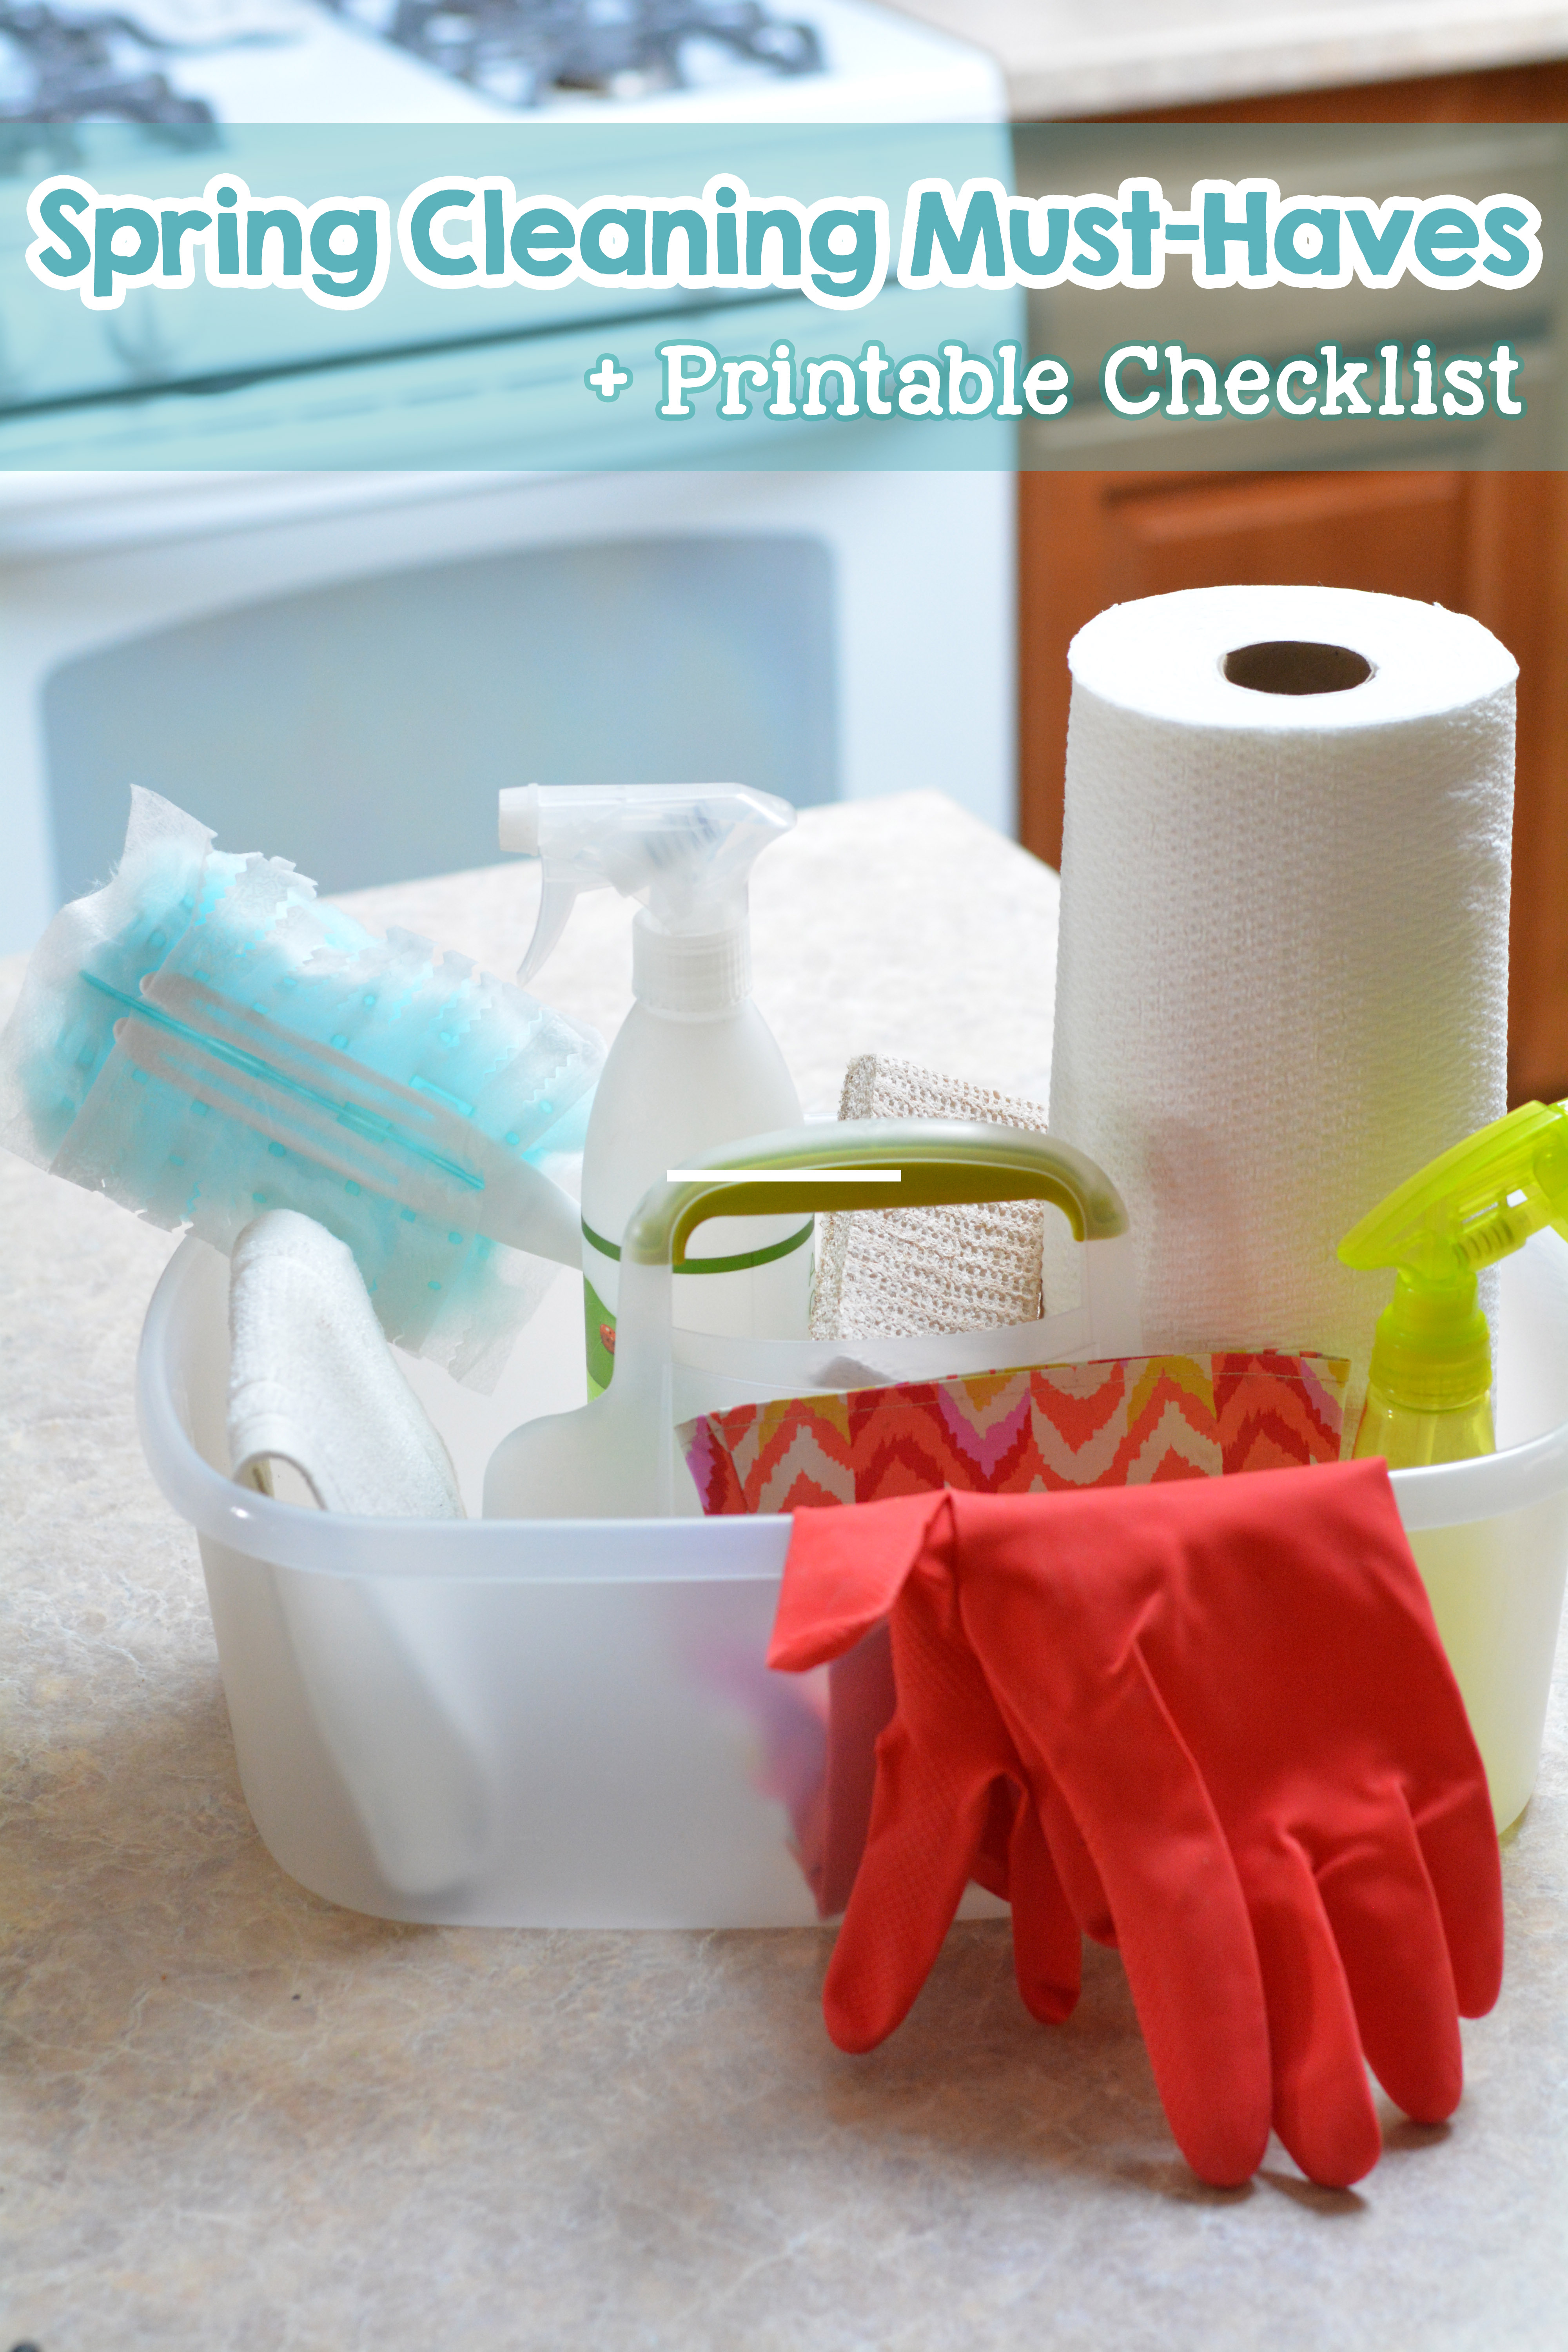 Must-Have Items for Spring Cleaning + Printable Checklist